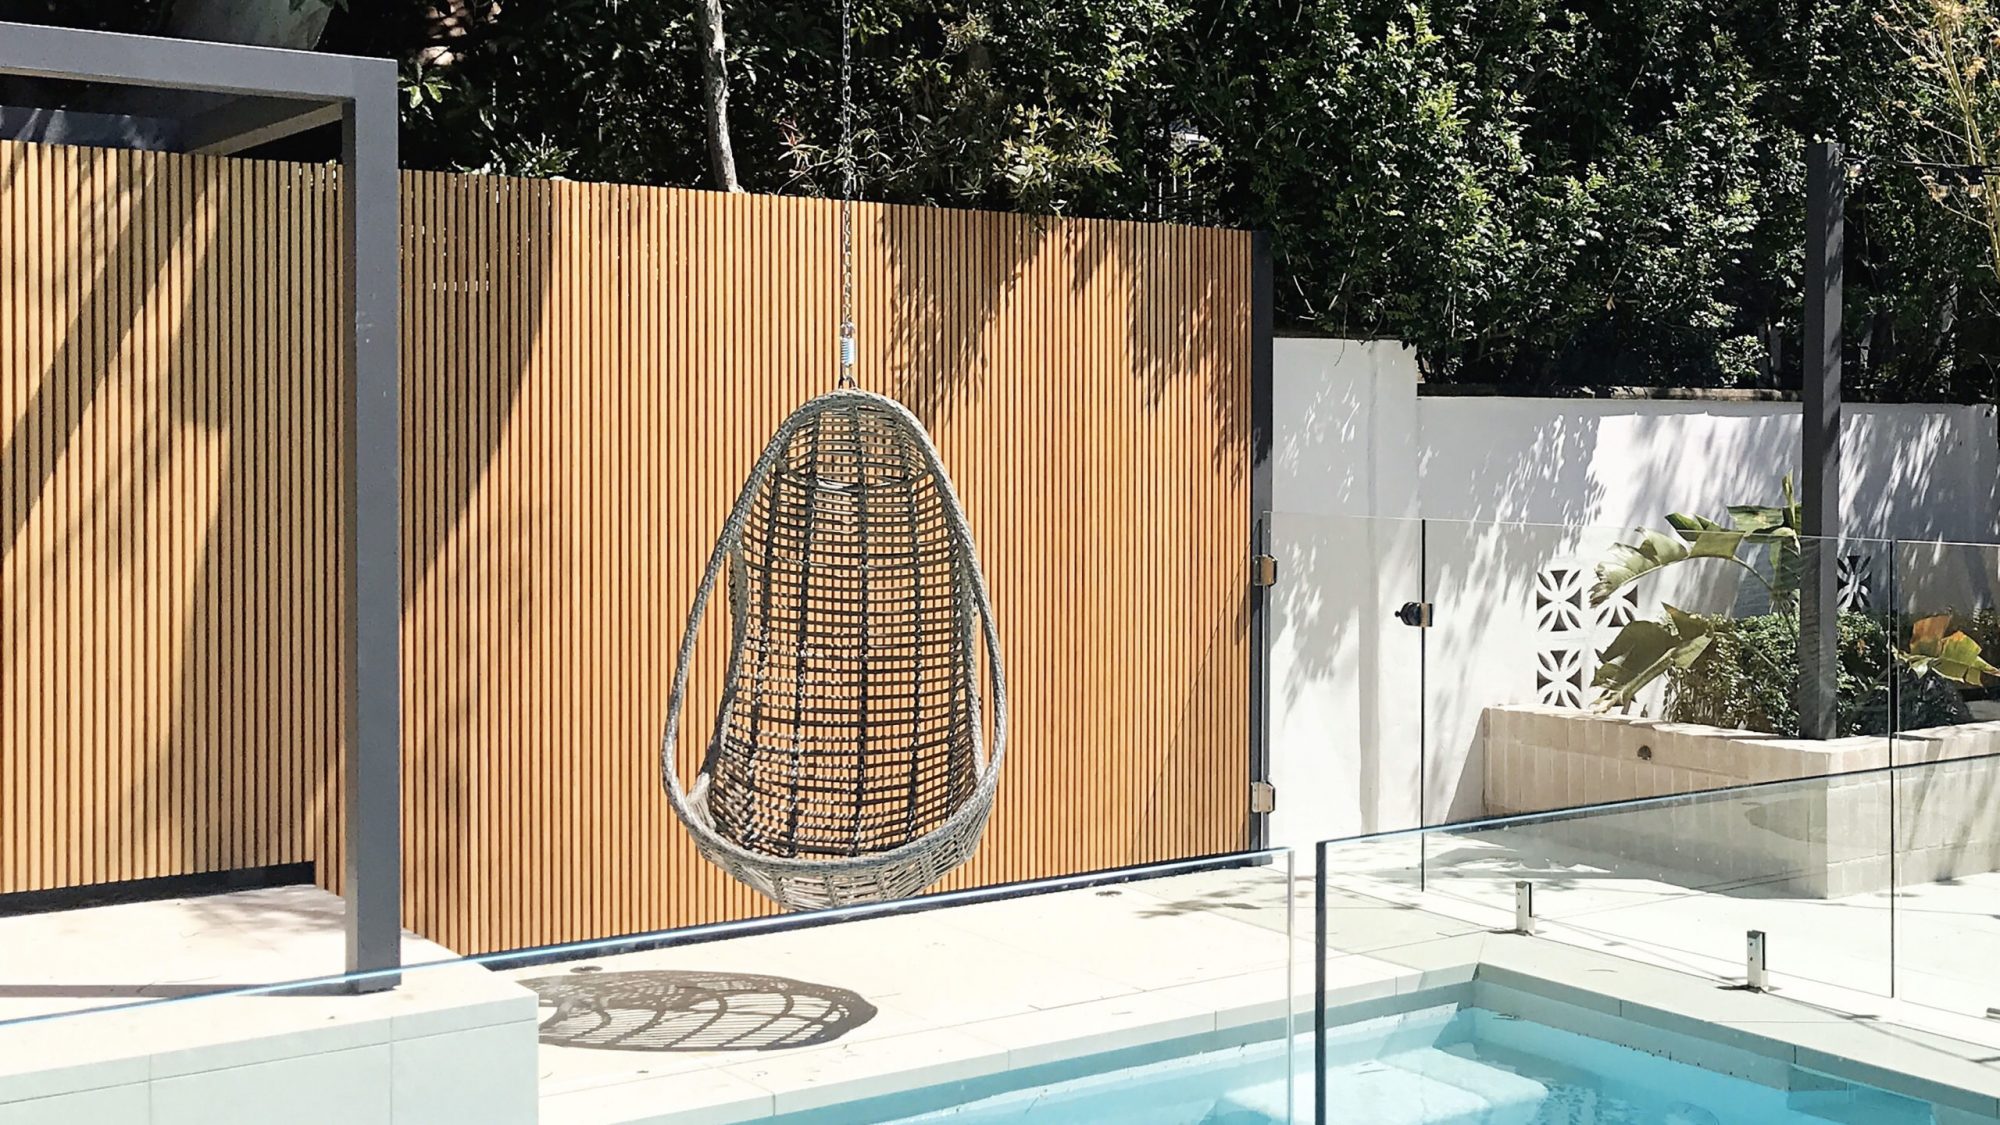 Engineered Bamboo Pool Fence - Meets Boundary Pool Fence Requirements